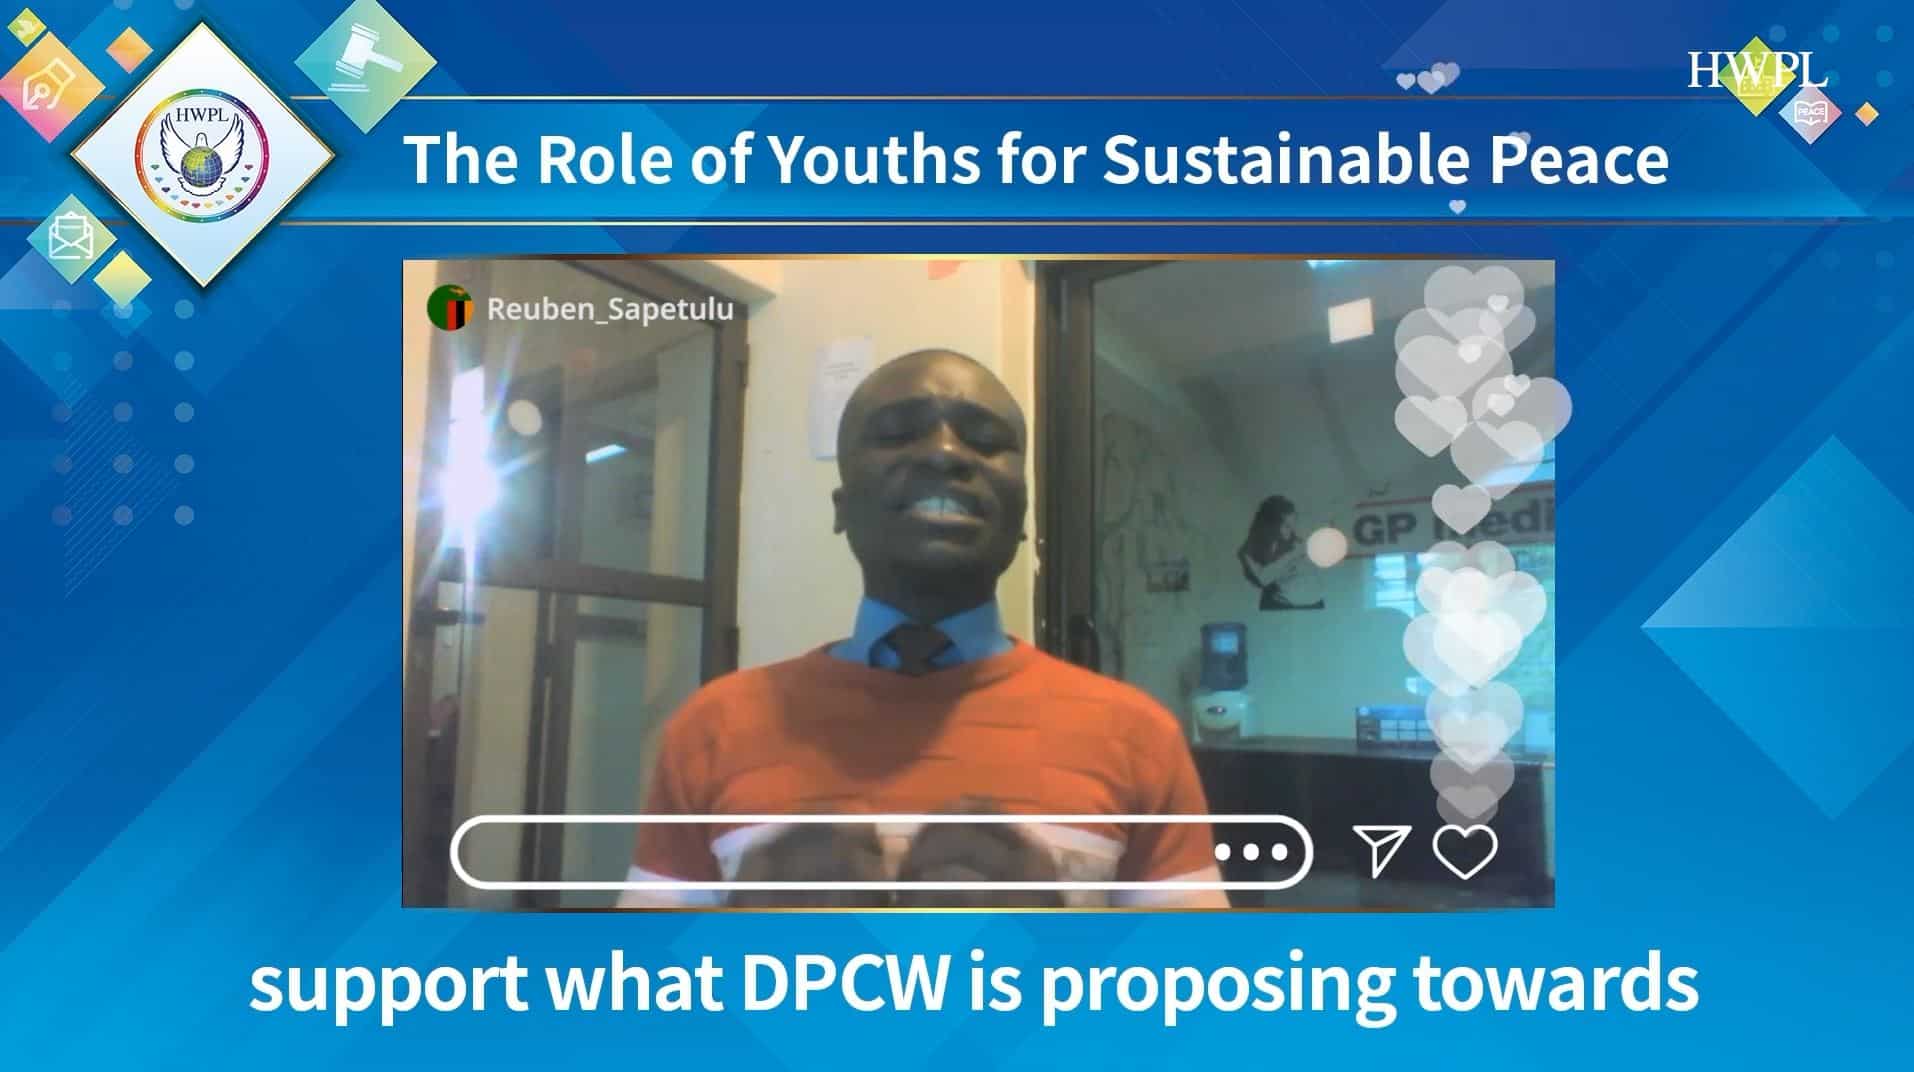 Mr. Reuben Sapetulu urging the support for the DPCW